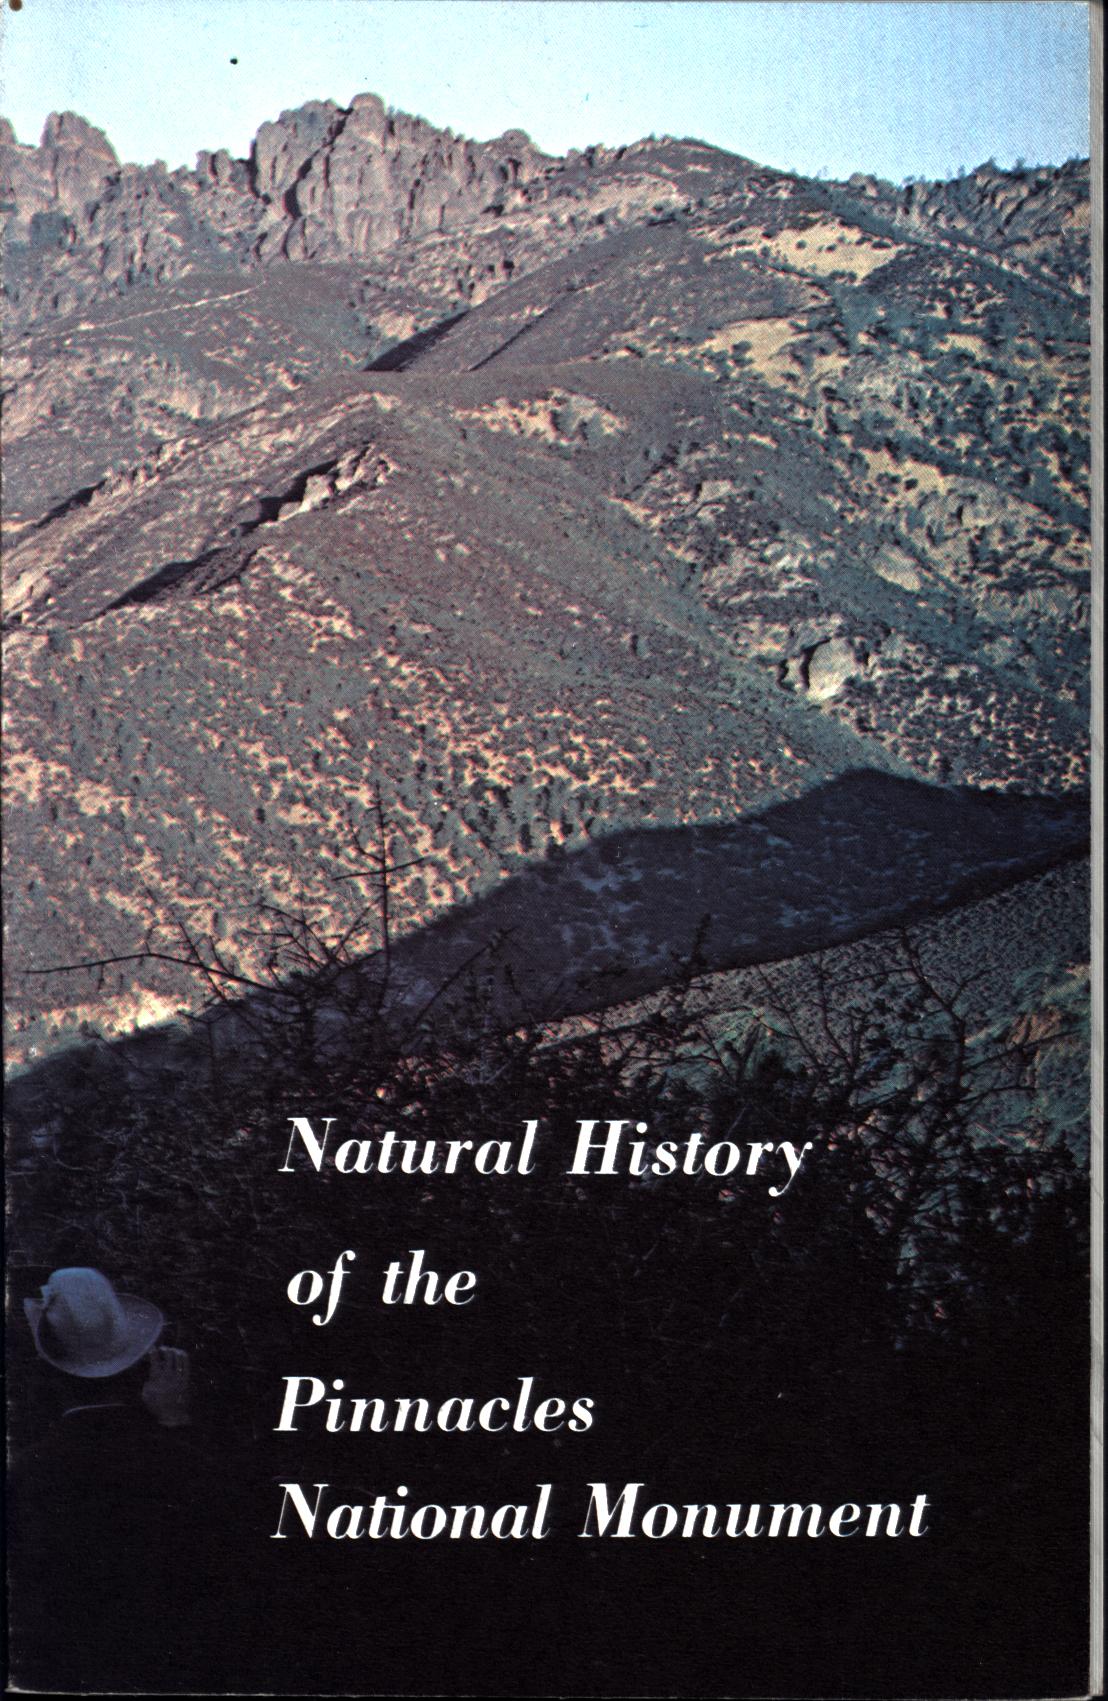 NATURAL HISTORY OF THE PINNACLES NATIONAL MONUMENT (now national park).